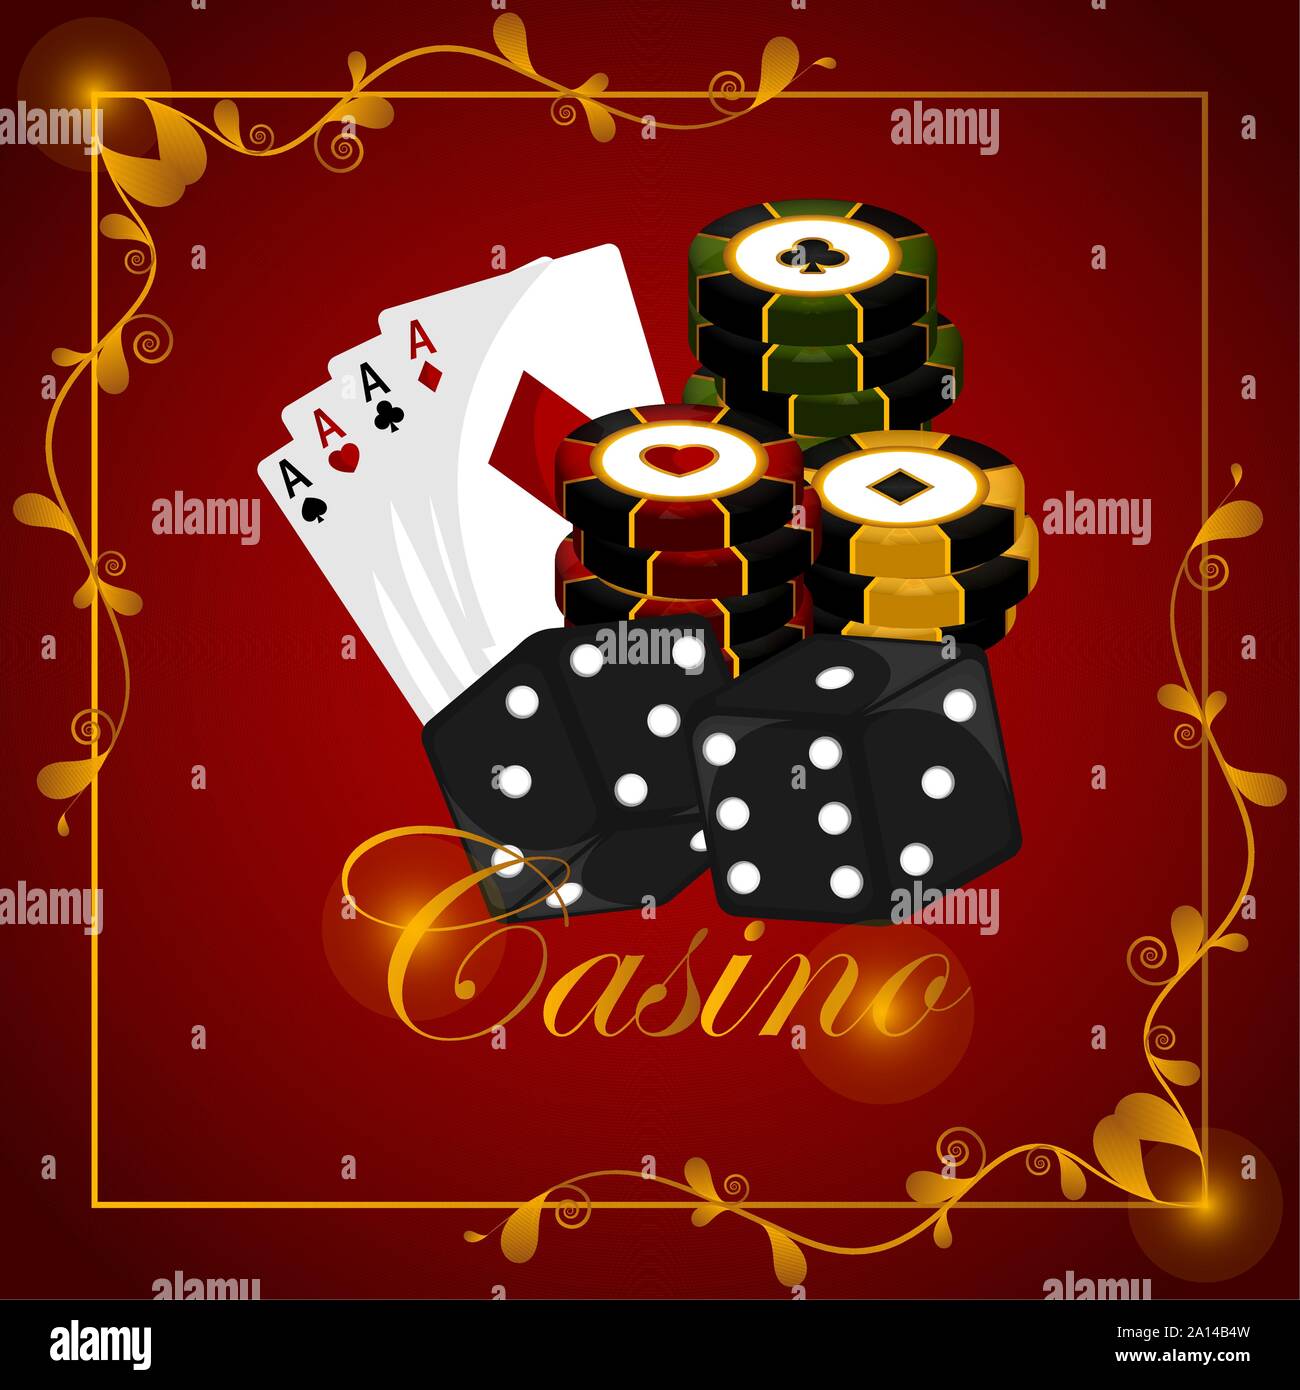 Casino poster with poker chips, dices and playing cards - Vector Stock ...